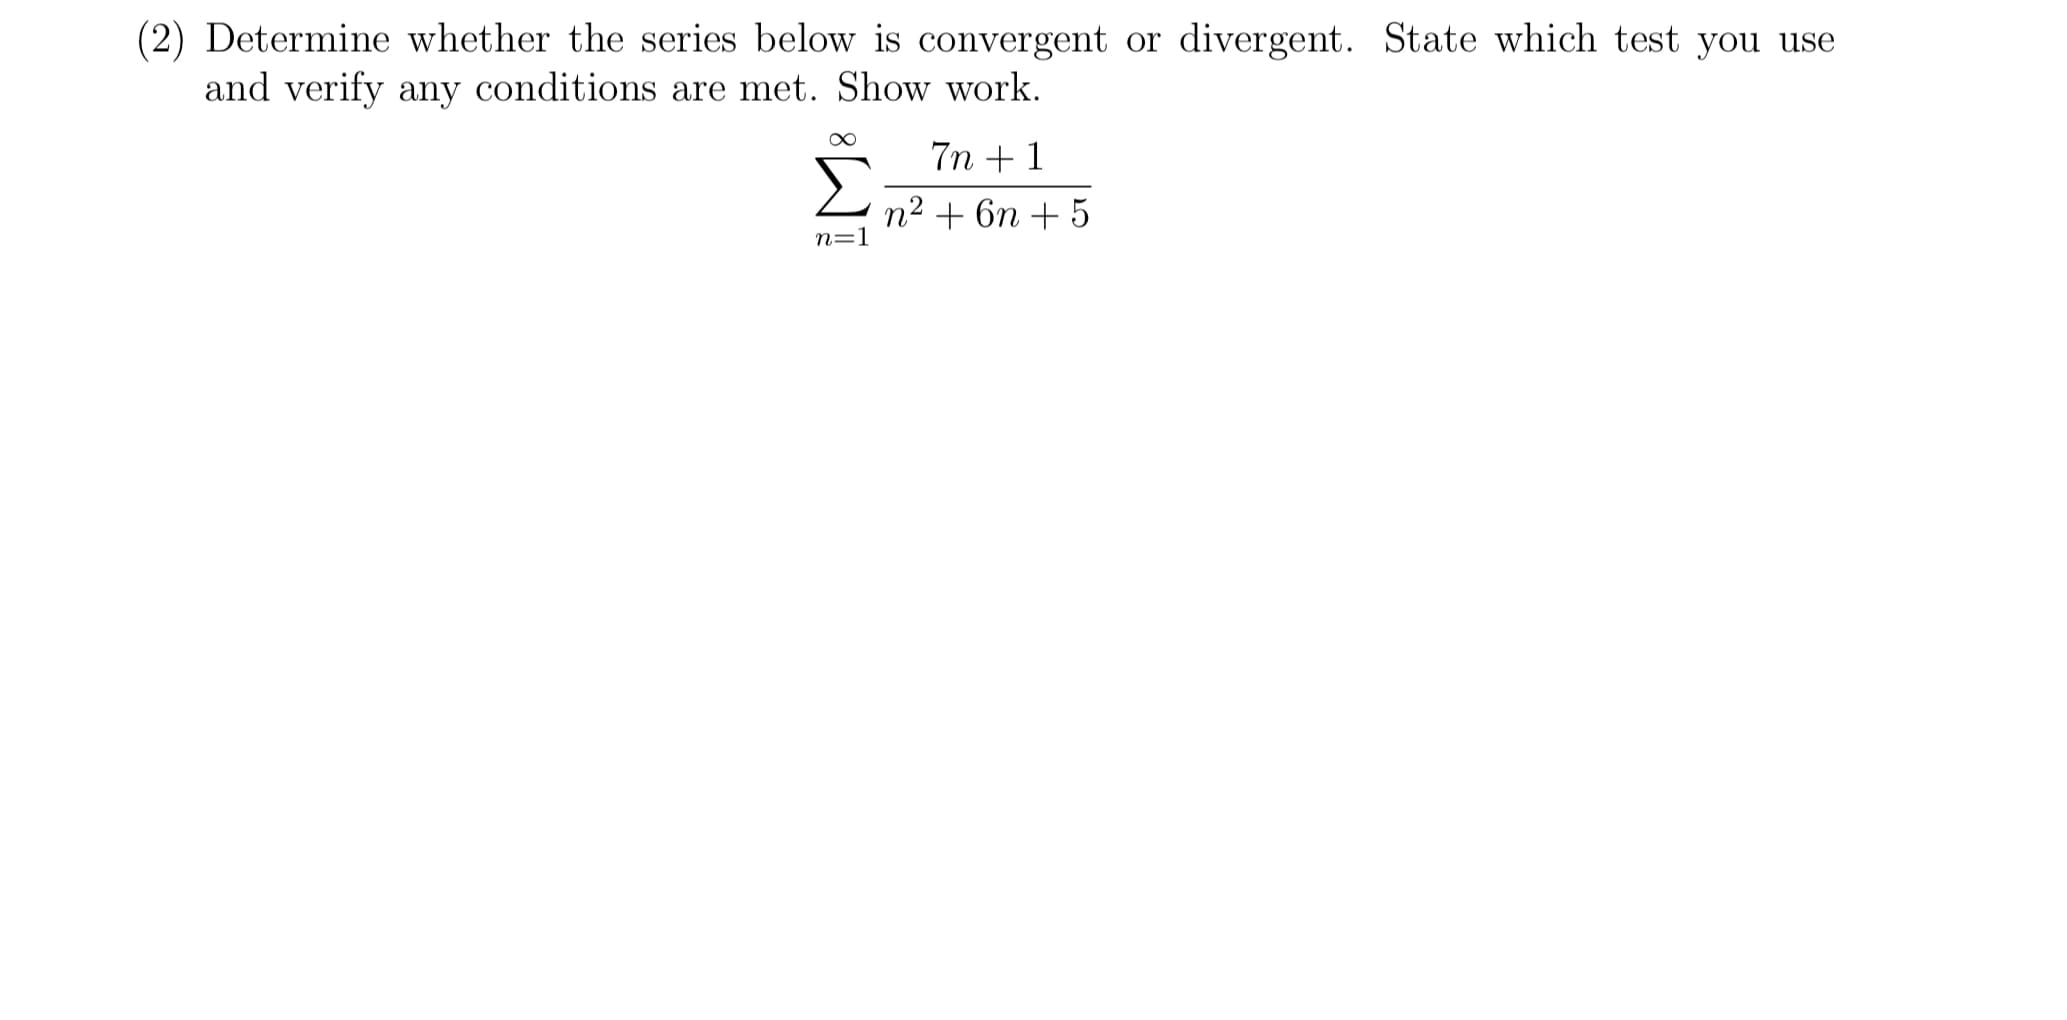 (2) Determine whether the series below is convergent or divergent. State which test you use
and verify any conditions are met. Show work.
7n +1
n2 + 6n + 5
n=1
